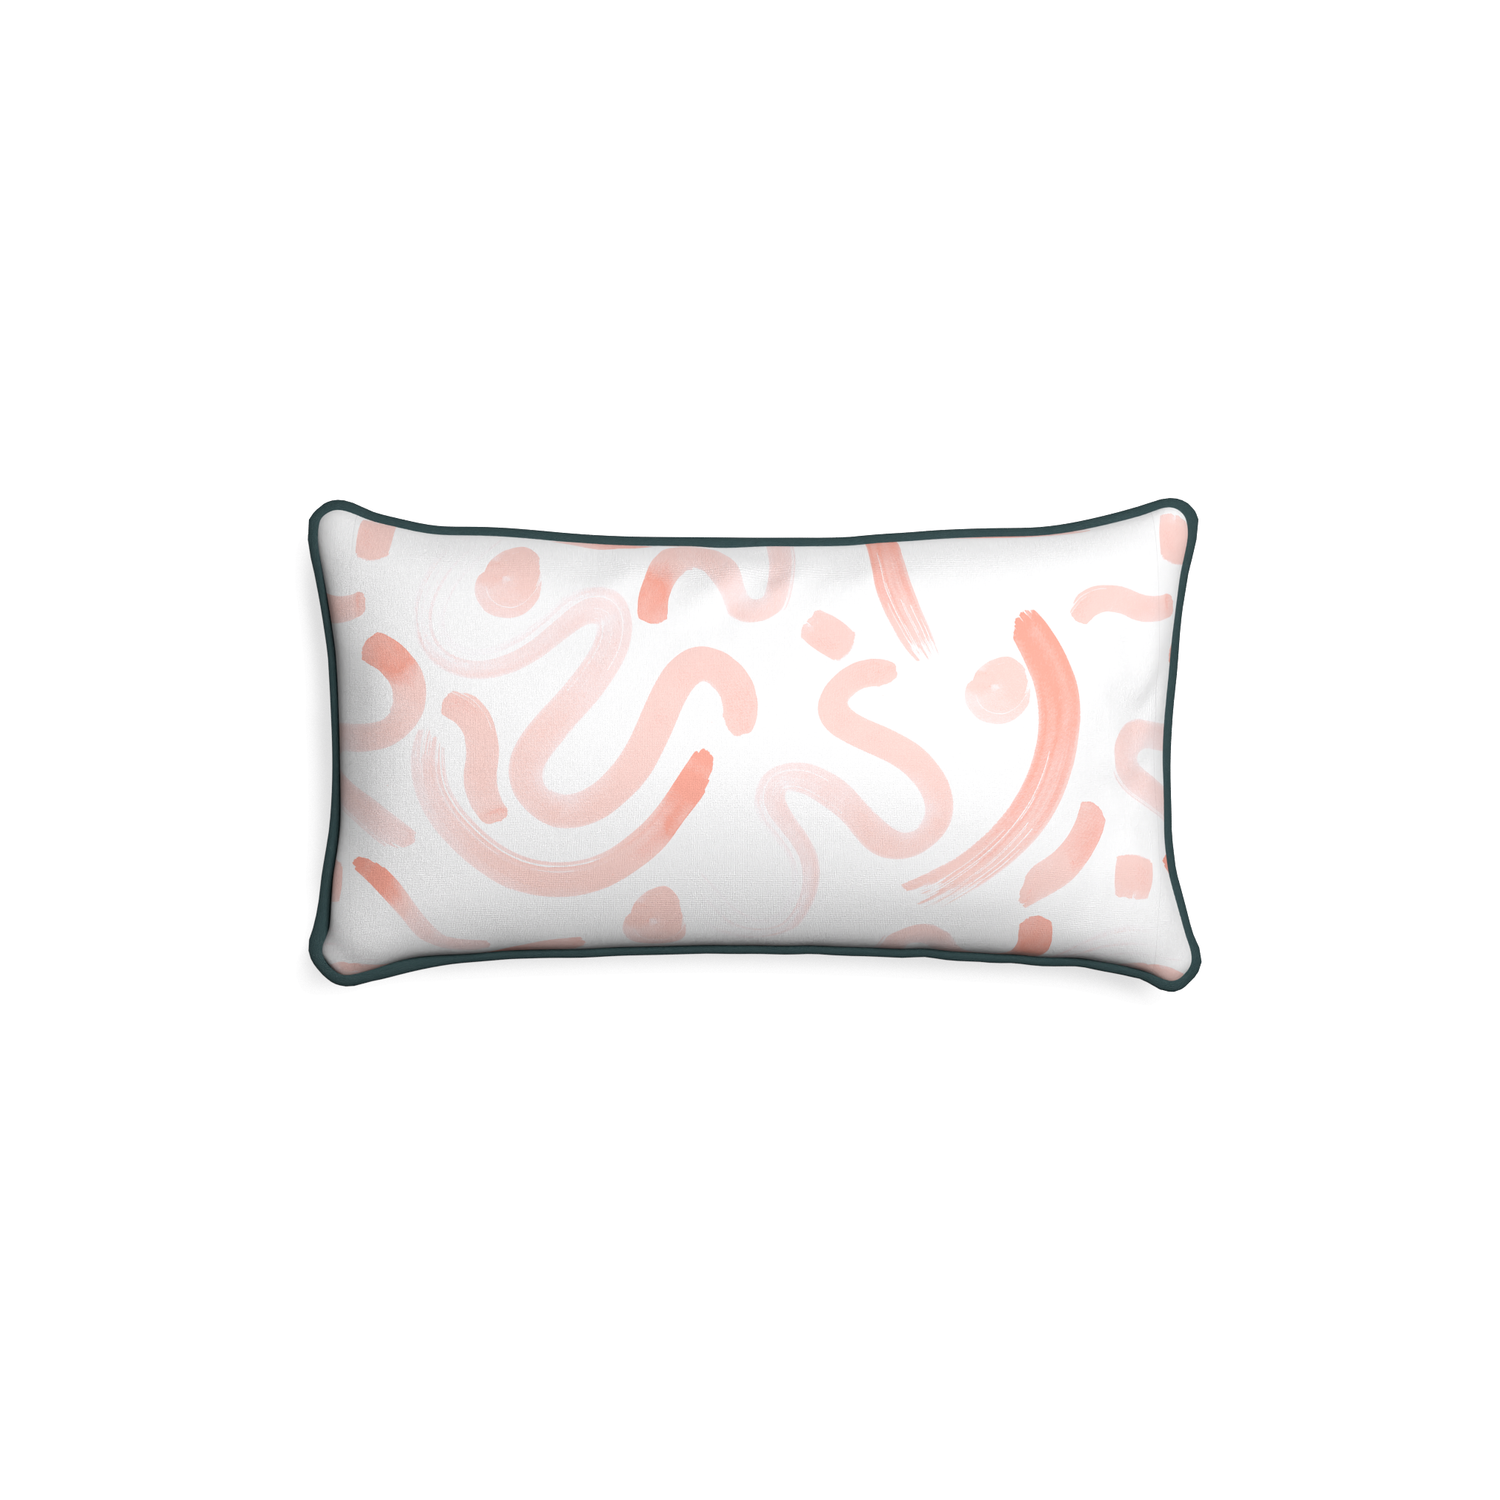 Petite-lumbar hockney pink custom pink graphicpillow with p piping on white background